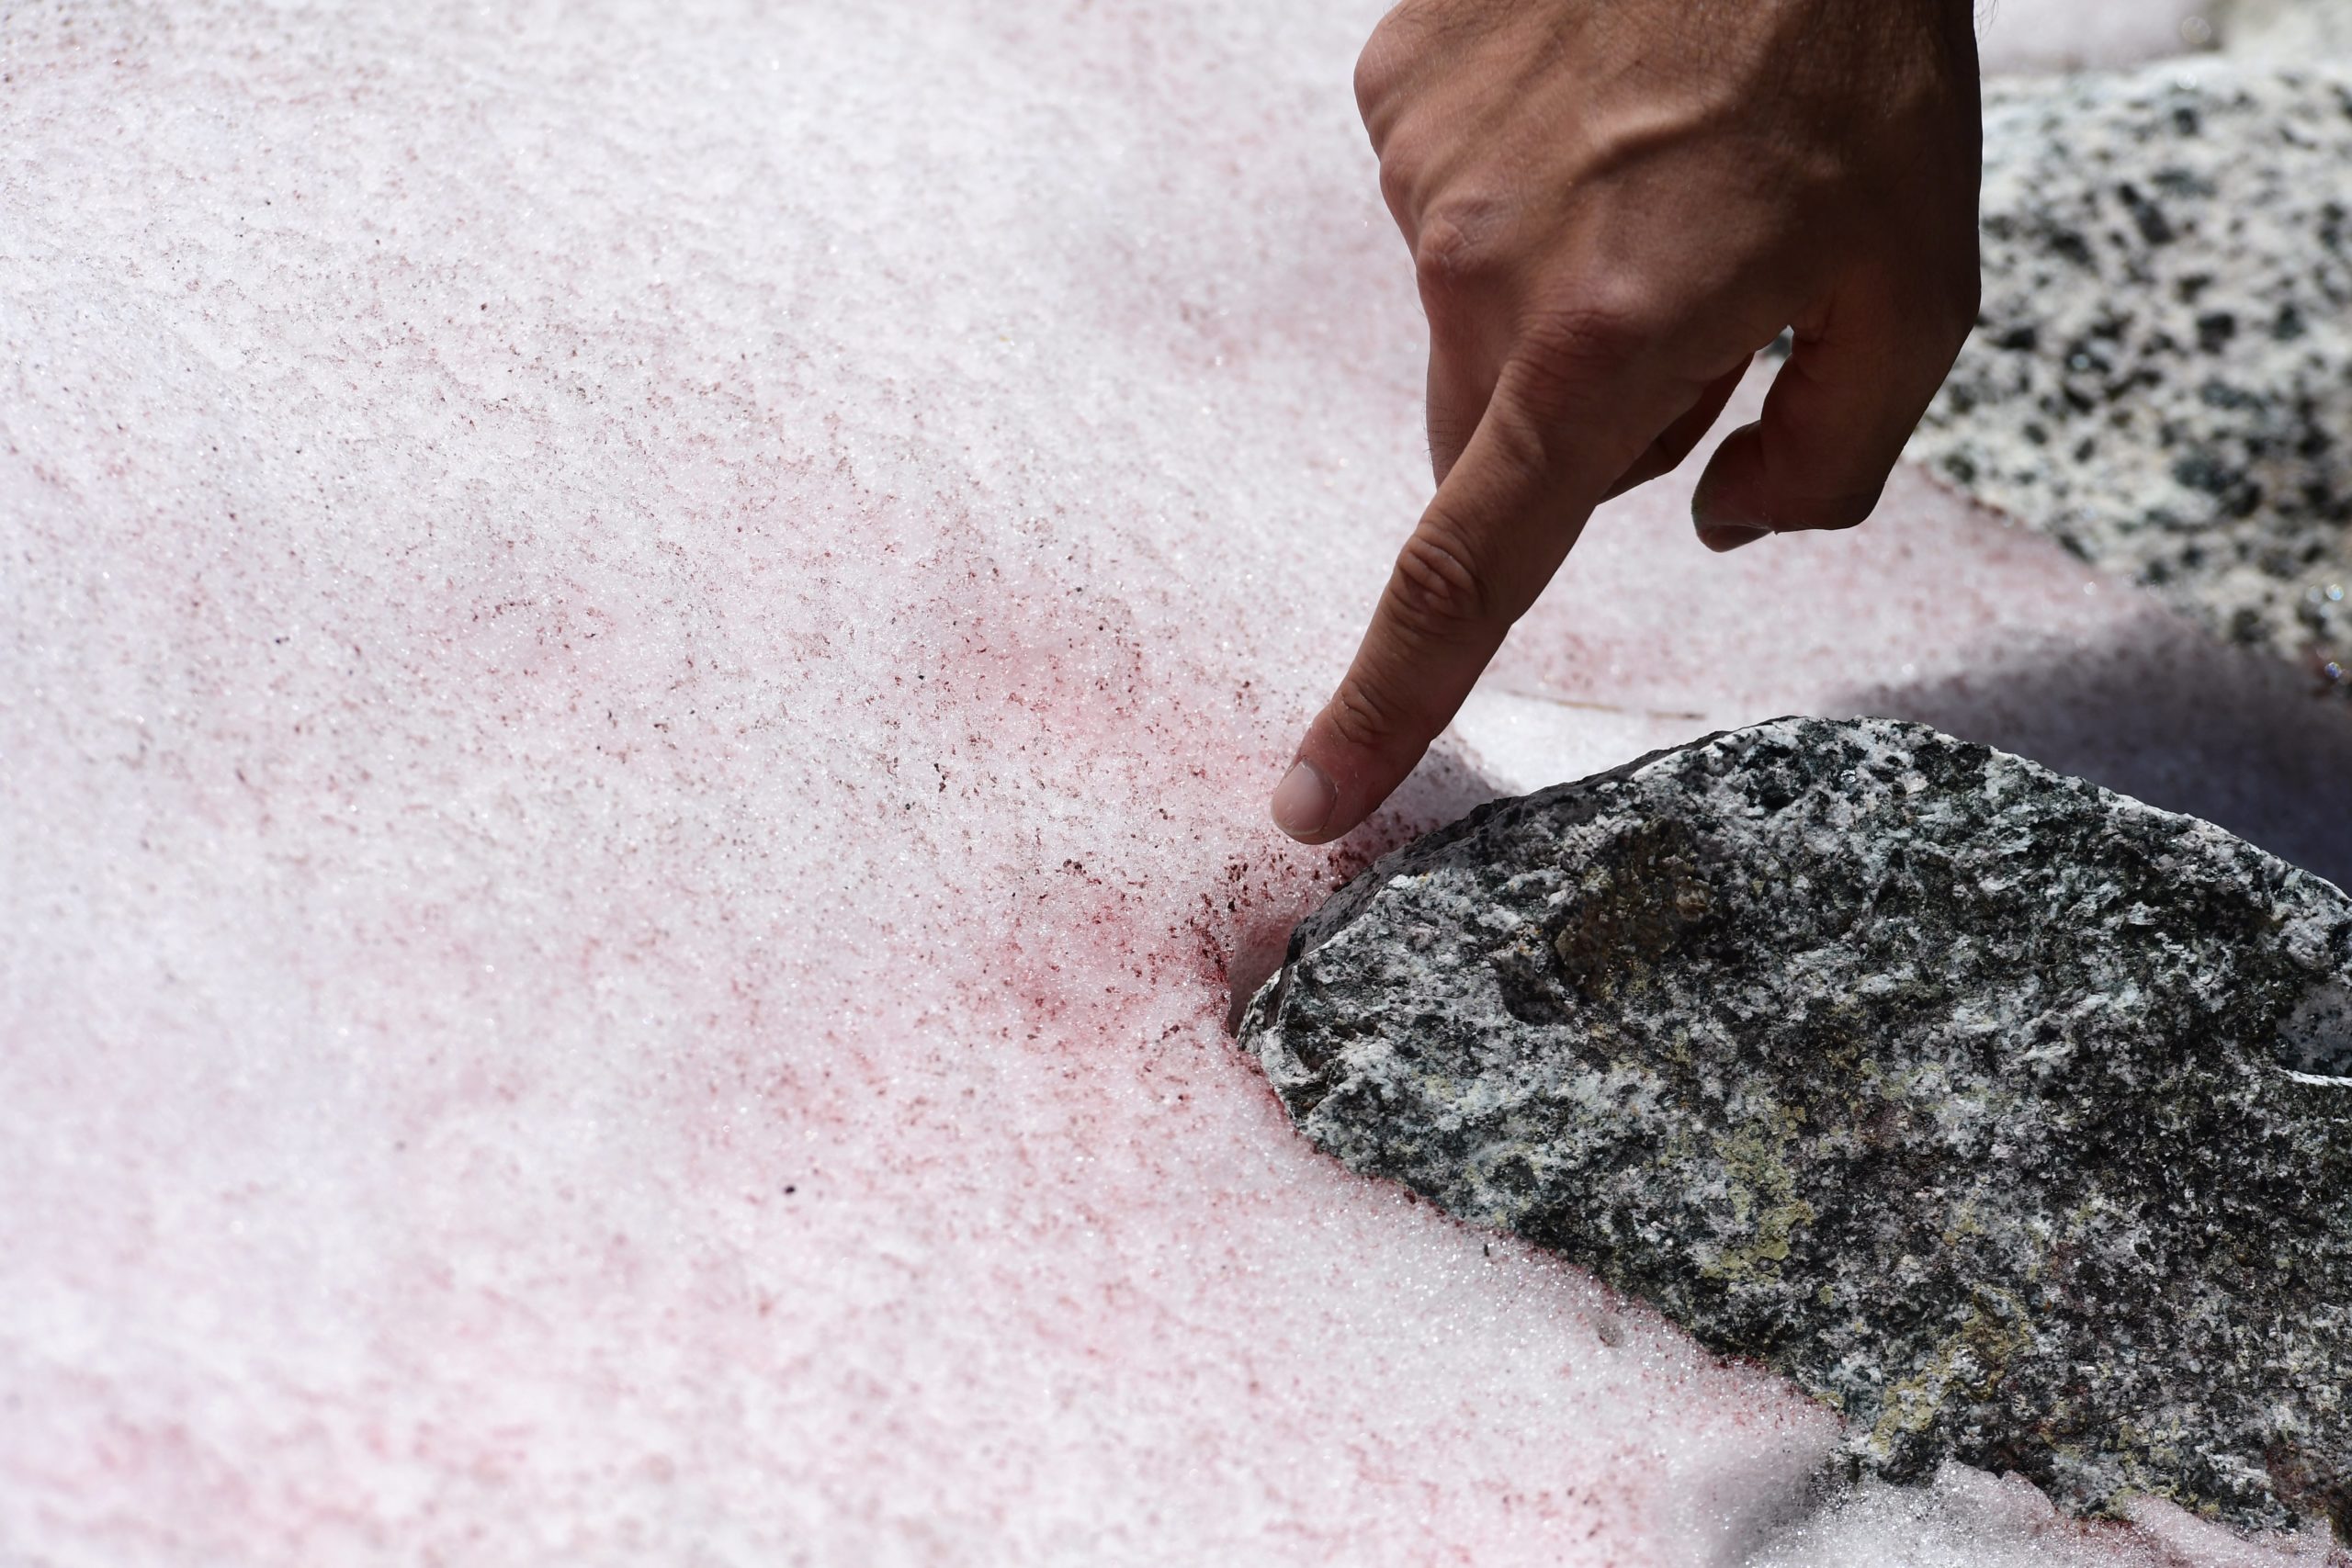 Biagio Di Mauro points to the pink snow on July 4, 2020, on the top of the Presena Glacier near Pellizzano. (Photo: Miguel Medina / AFP, Getty Images)